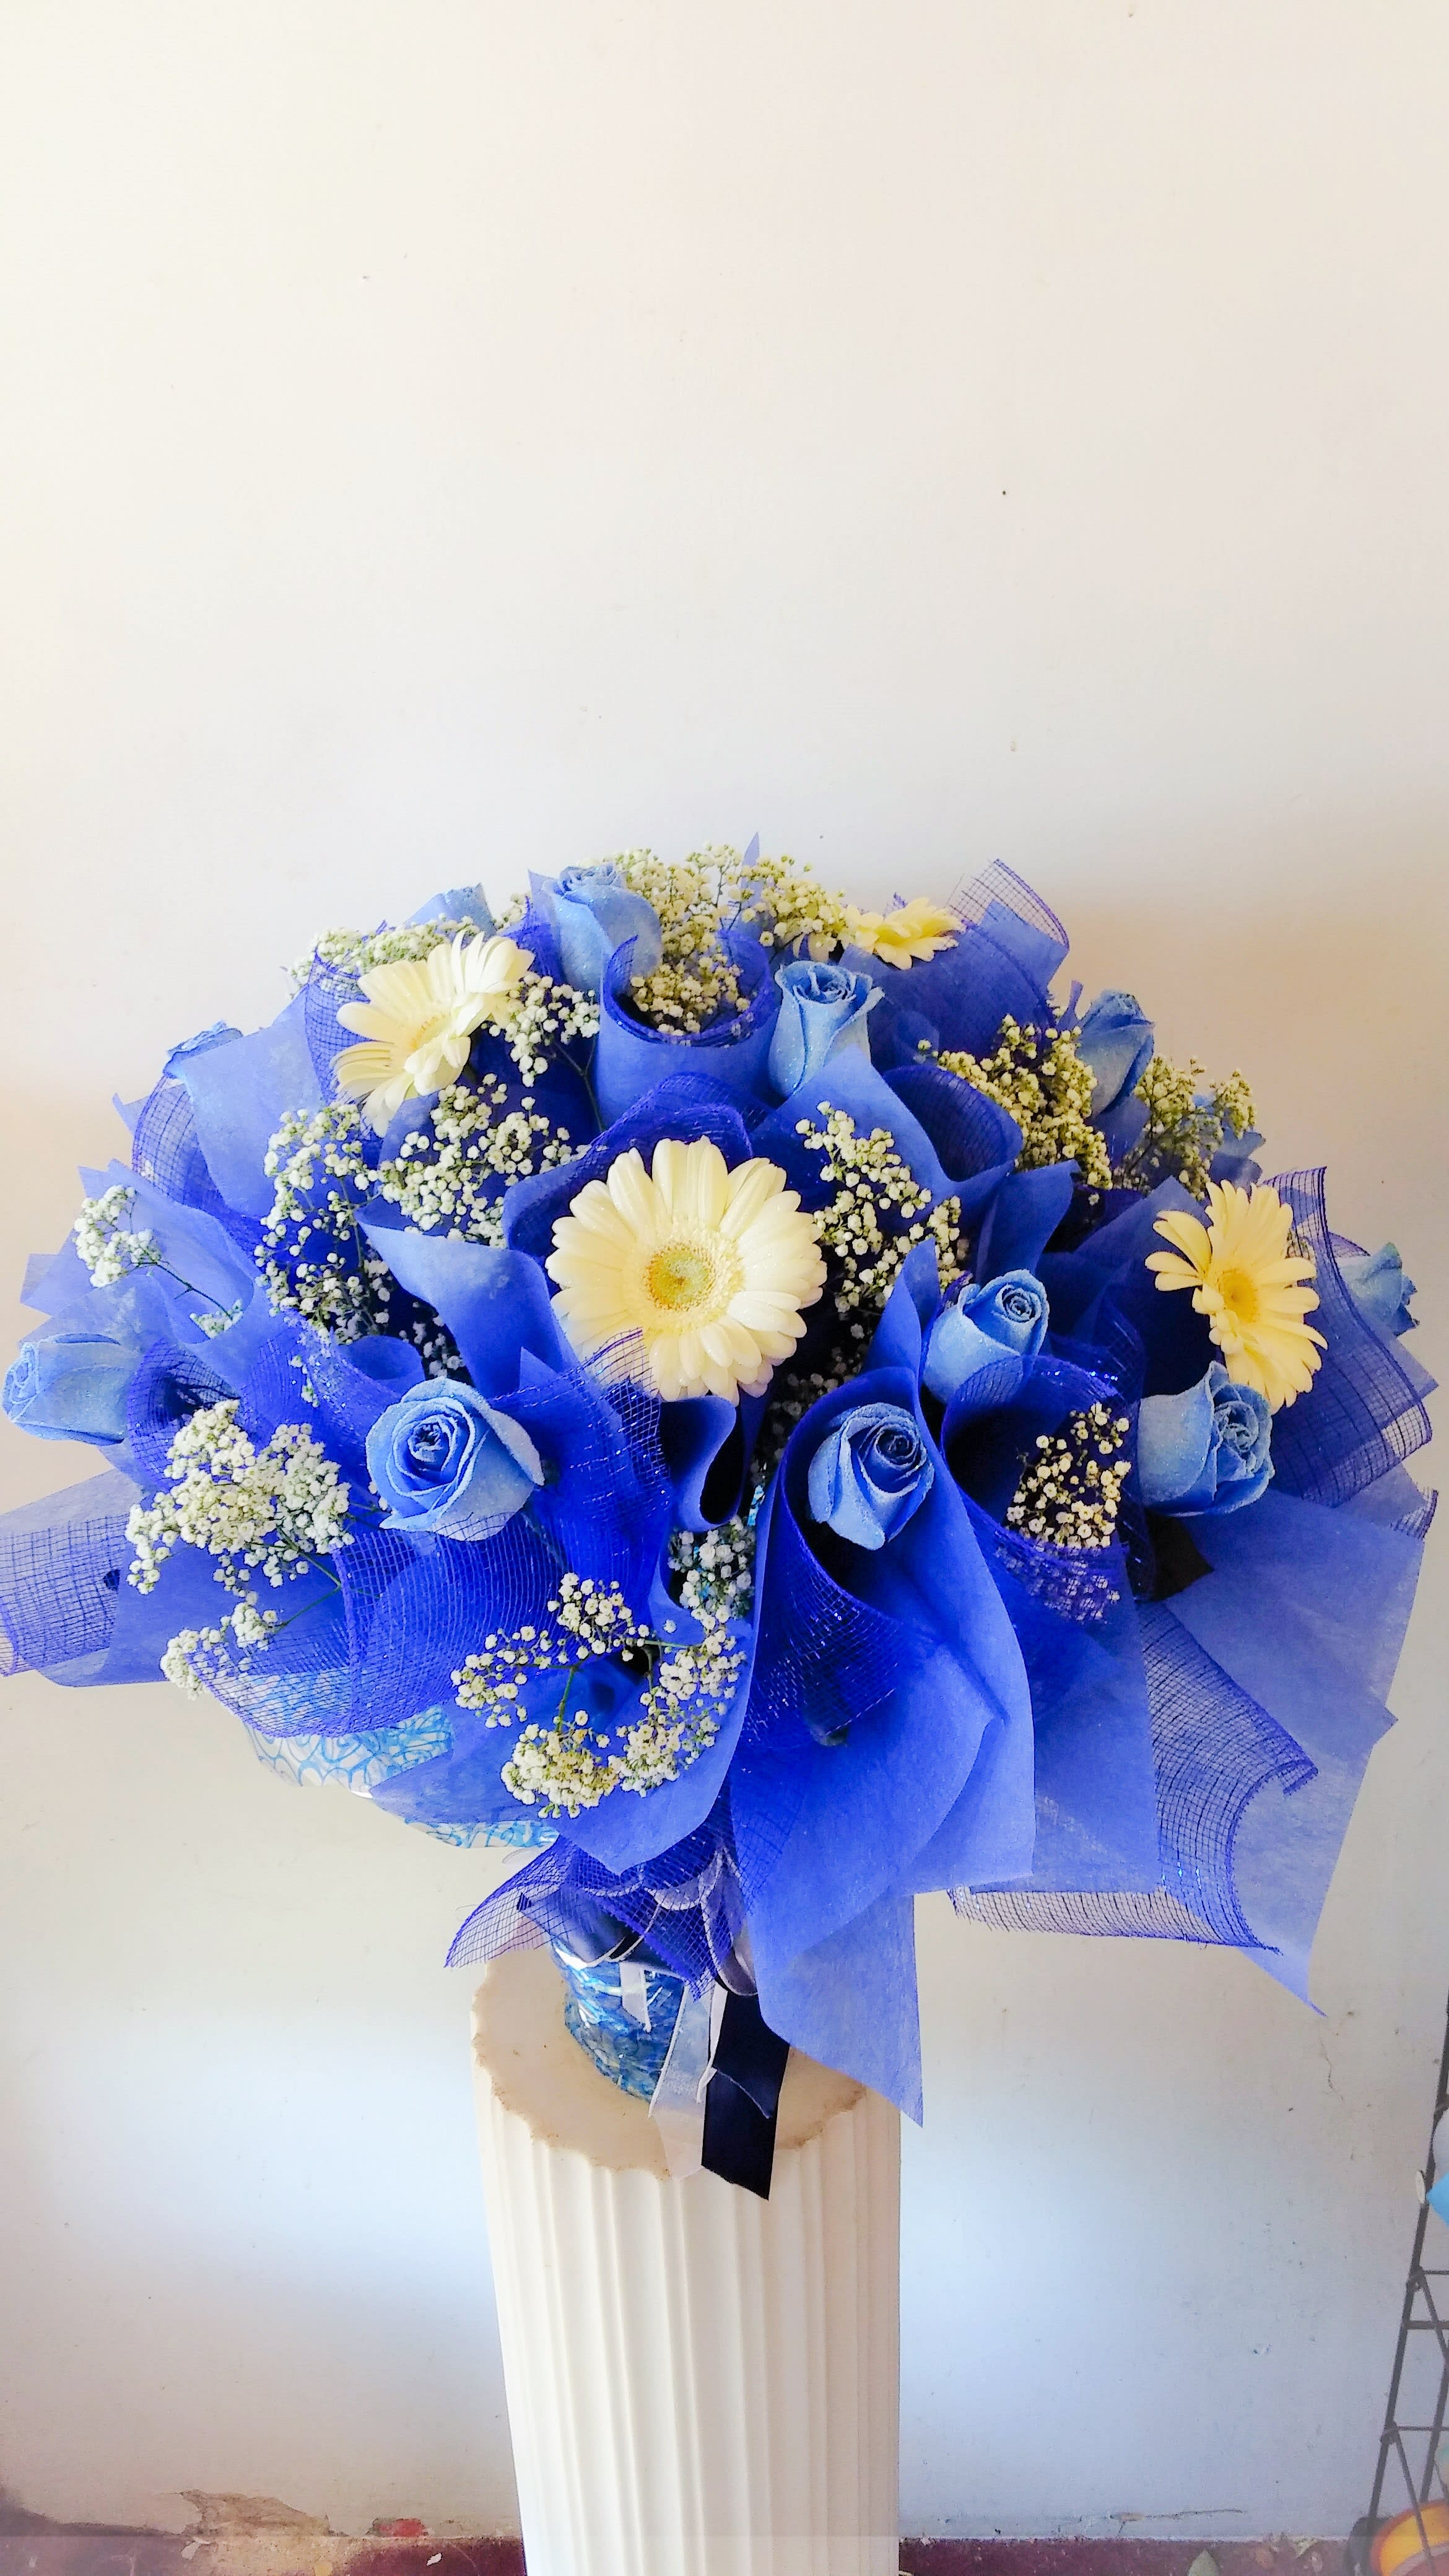 Blue Roses - 1 dz. blue roses with white gerbera daisy accents, elegantly wrapped Hong Kong style and arranged in a vase.